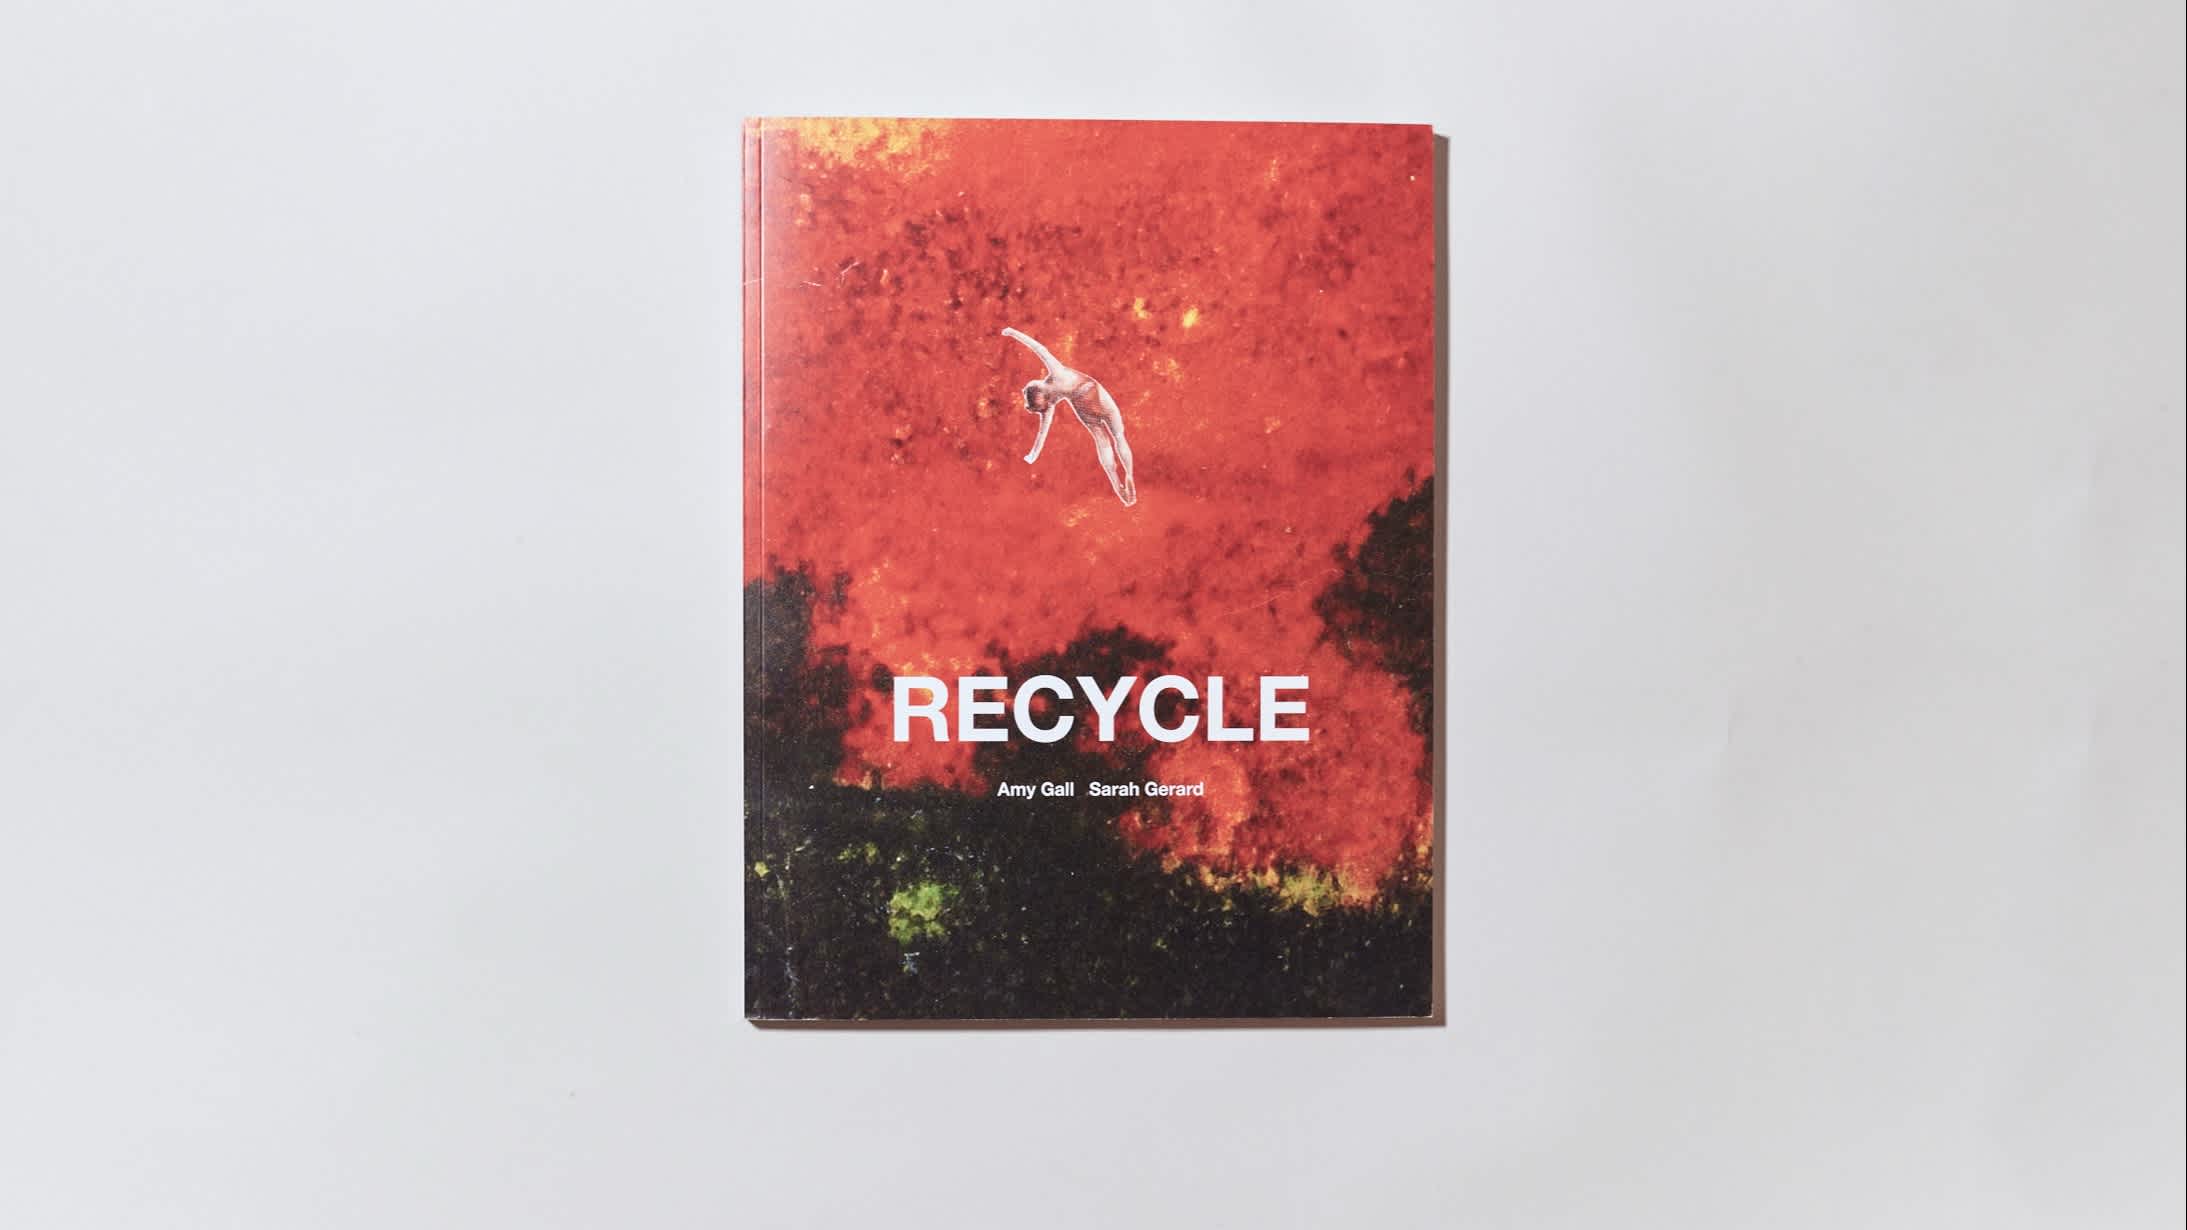 Reddish-orange and green book cover faces head on. A person appears to be falling or dancing above the title.